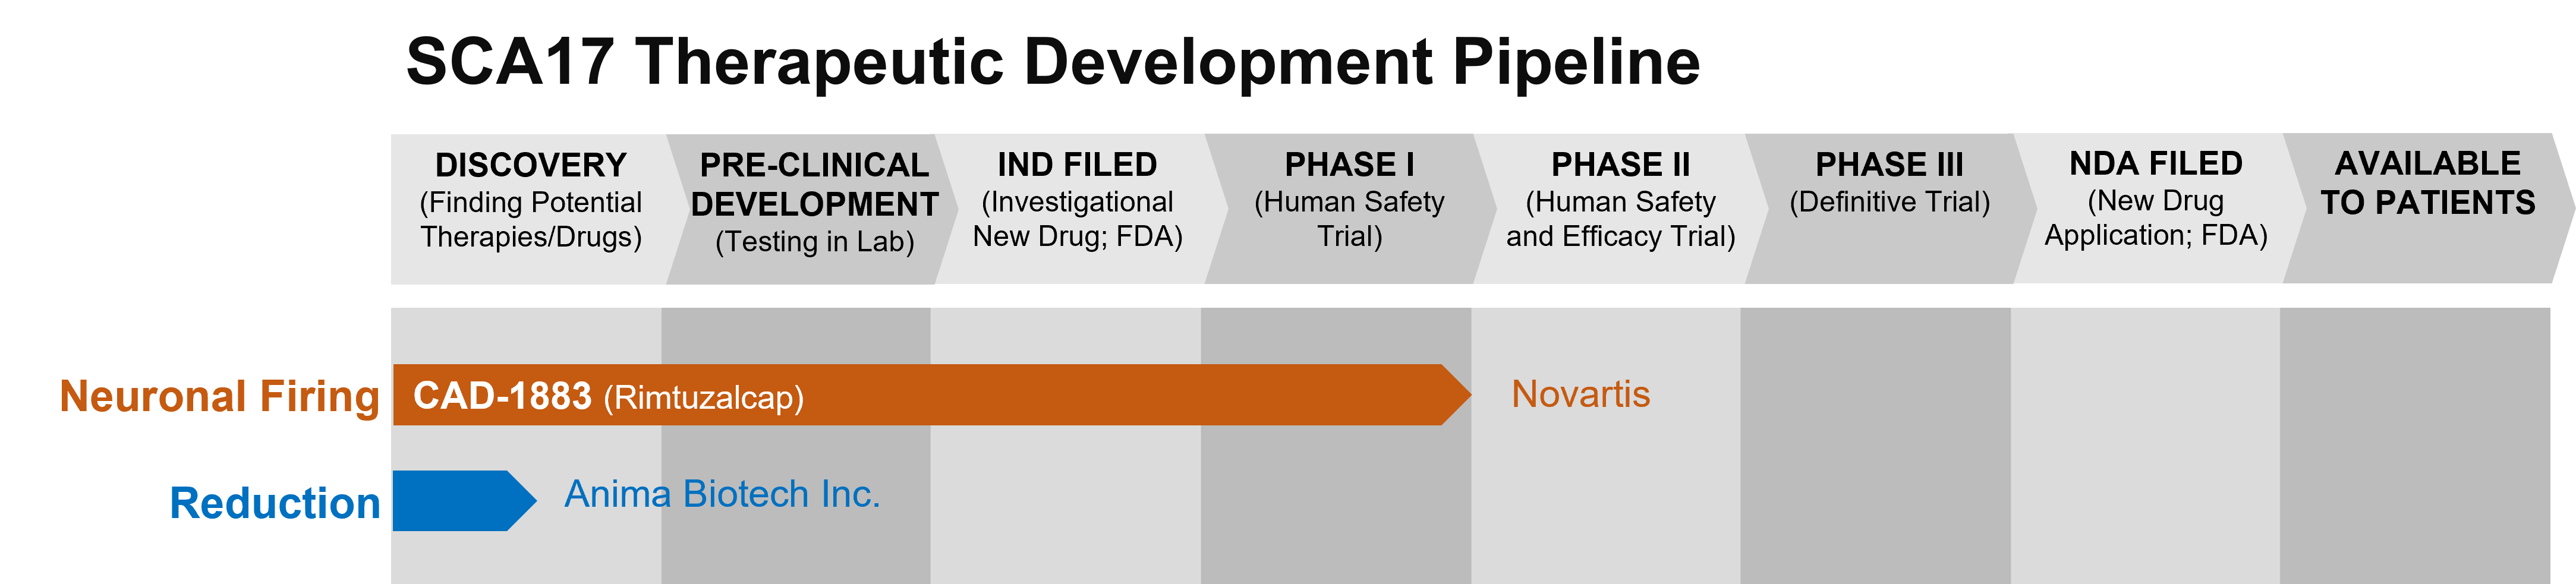 Graph depicting the phase of drug development for various drugs to treat SCA17